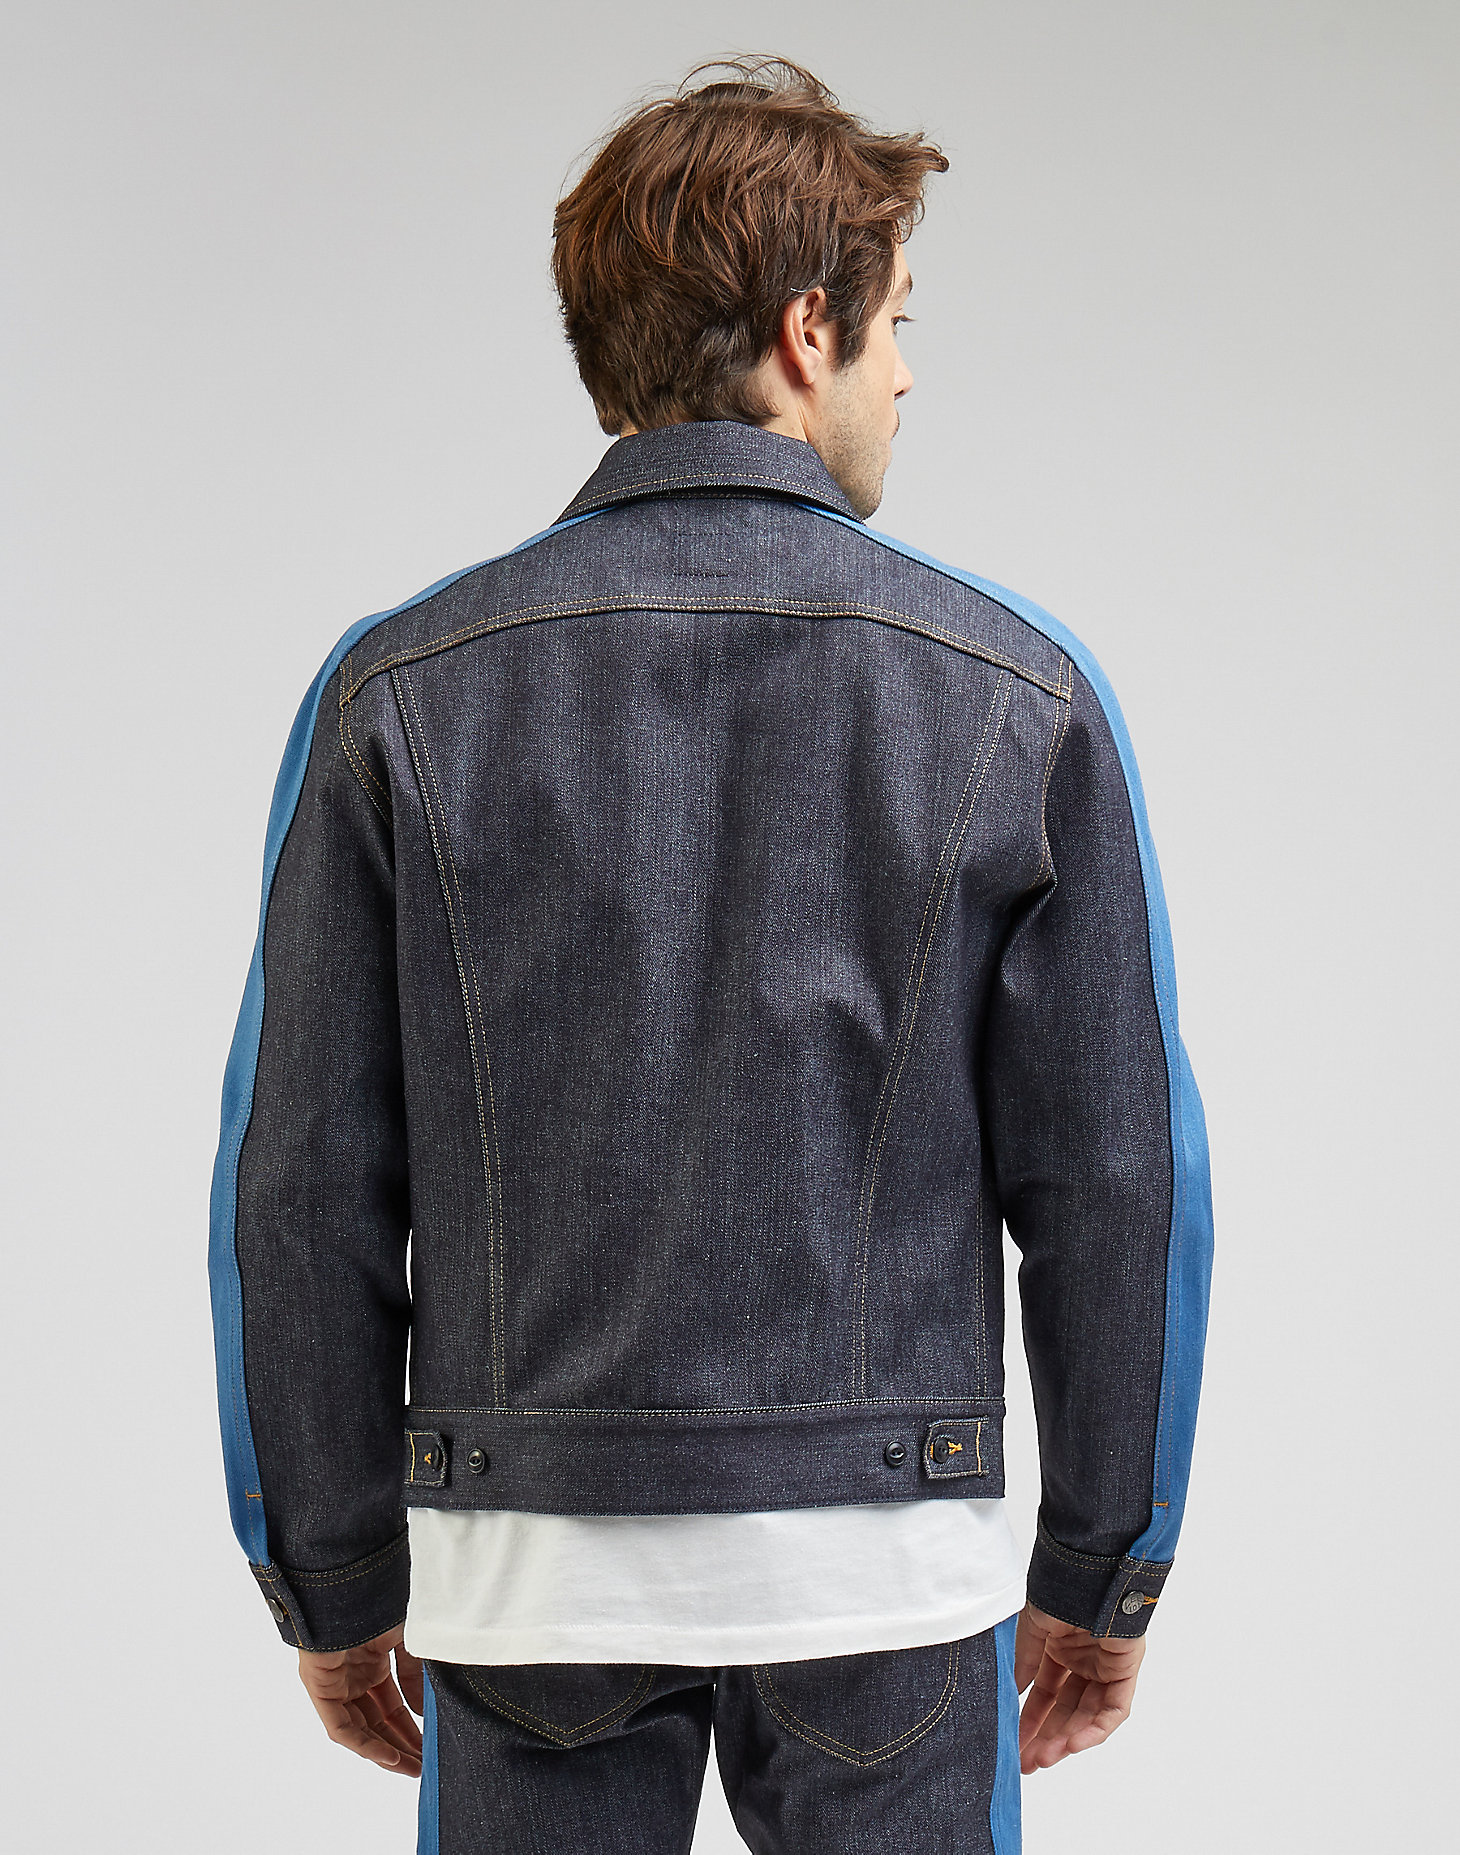 101 Panelled Rider Jacket in Dry alternative view 1